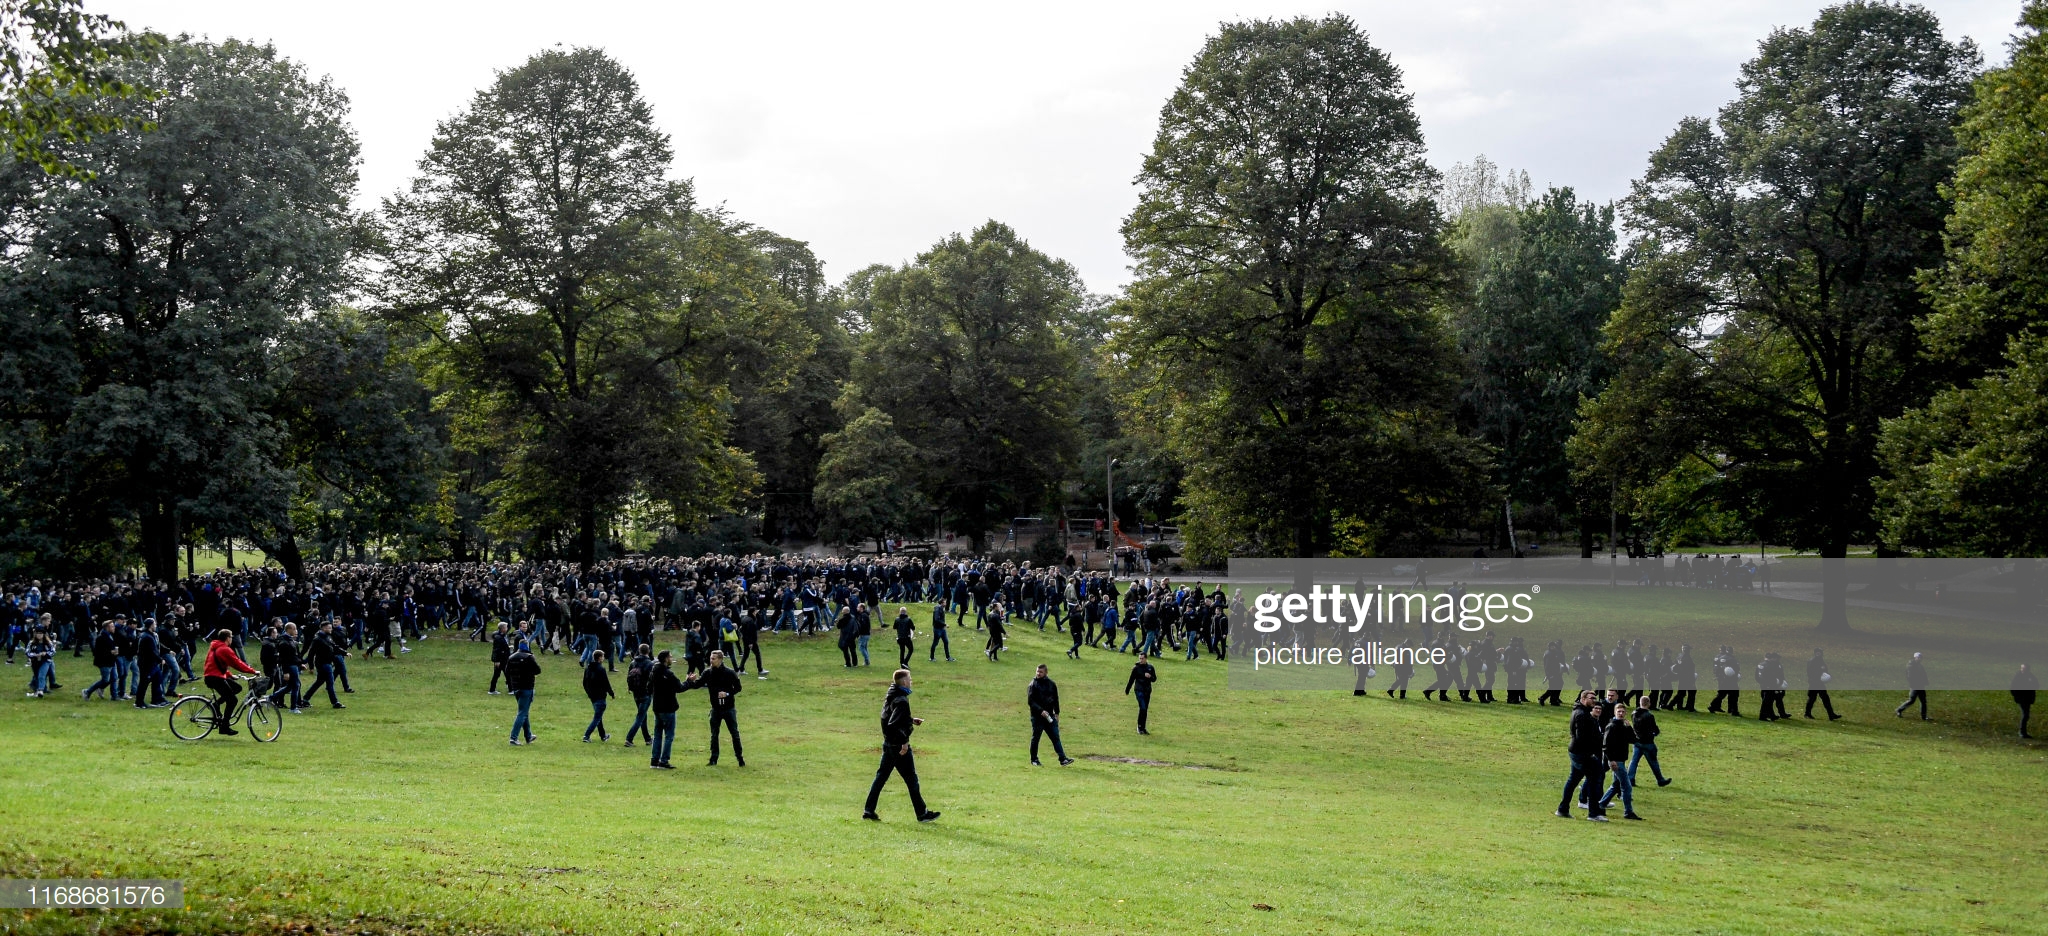 gettyimages-1168681576-2048x2048.jpg